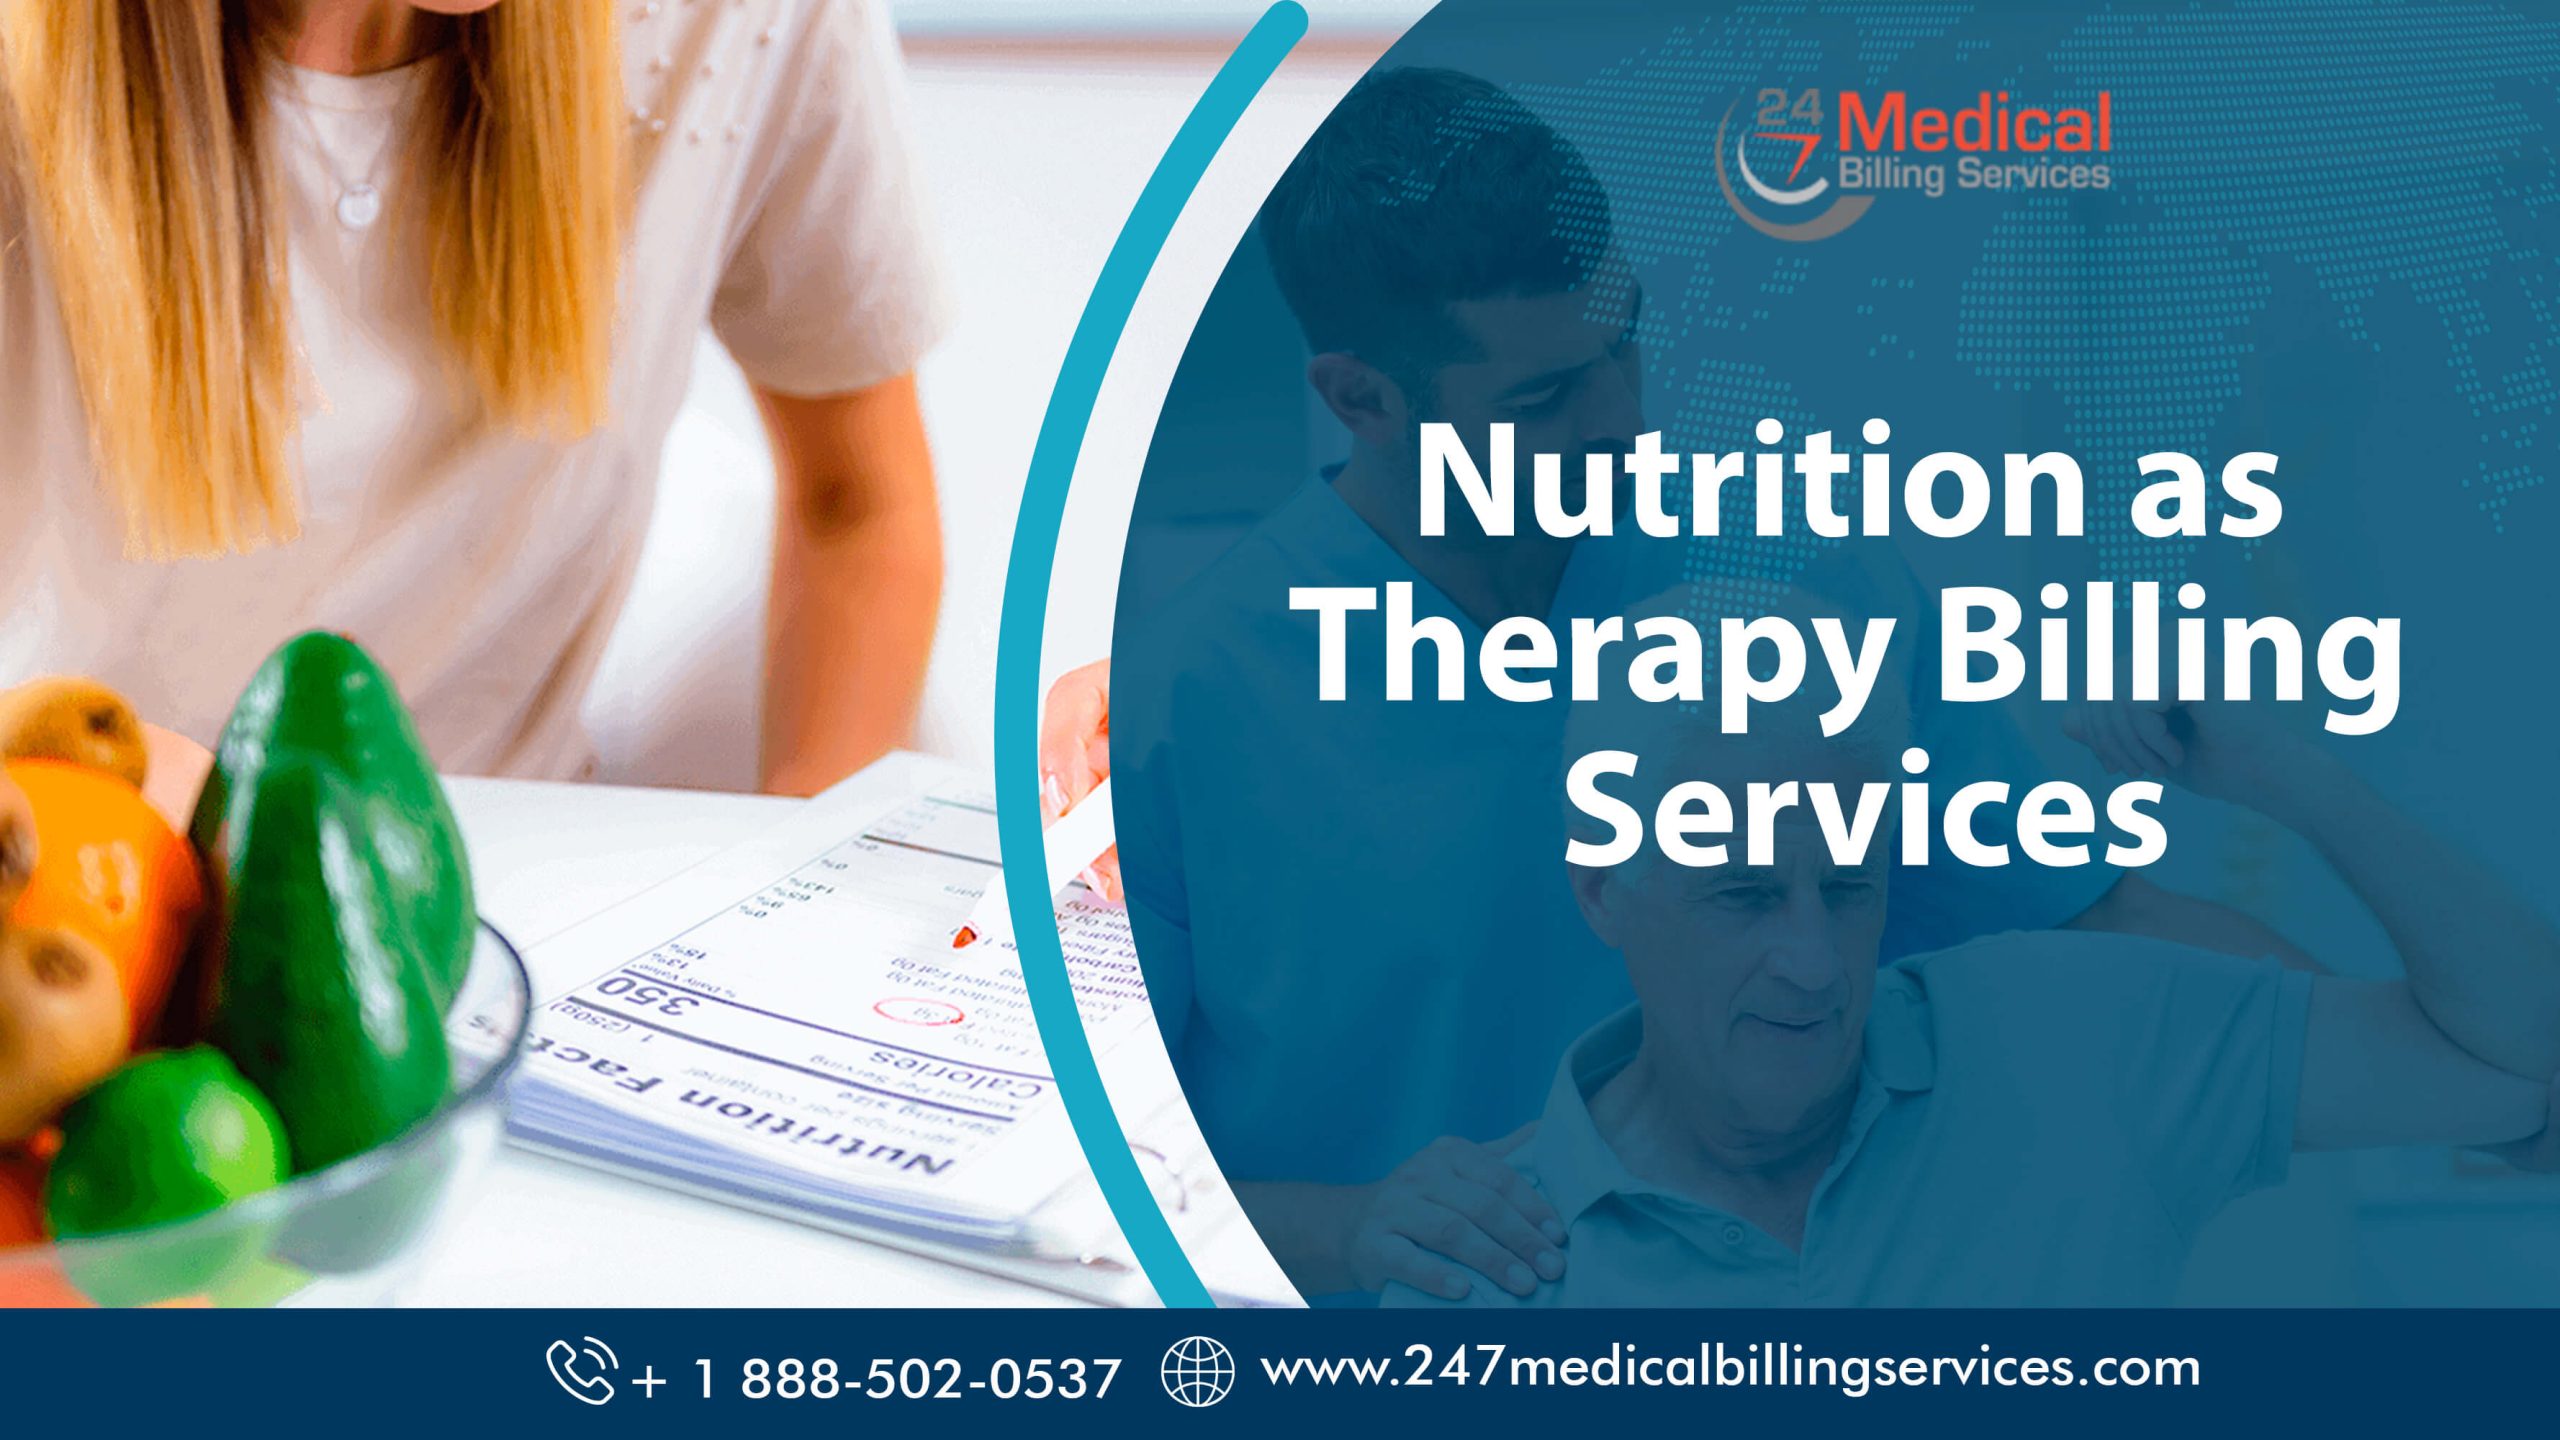  Nutrition as Therapy Billing Services